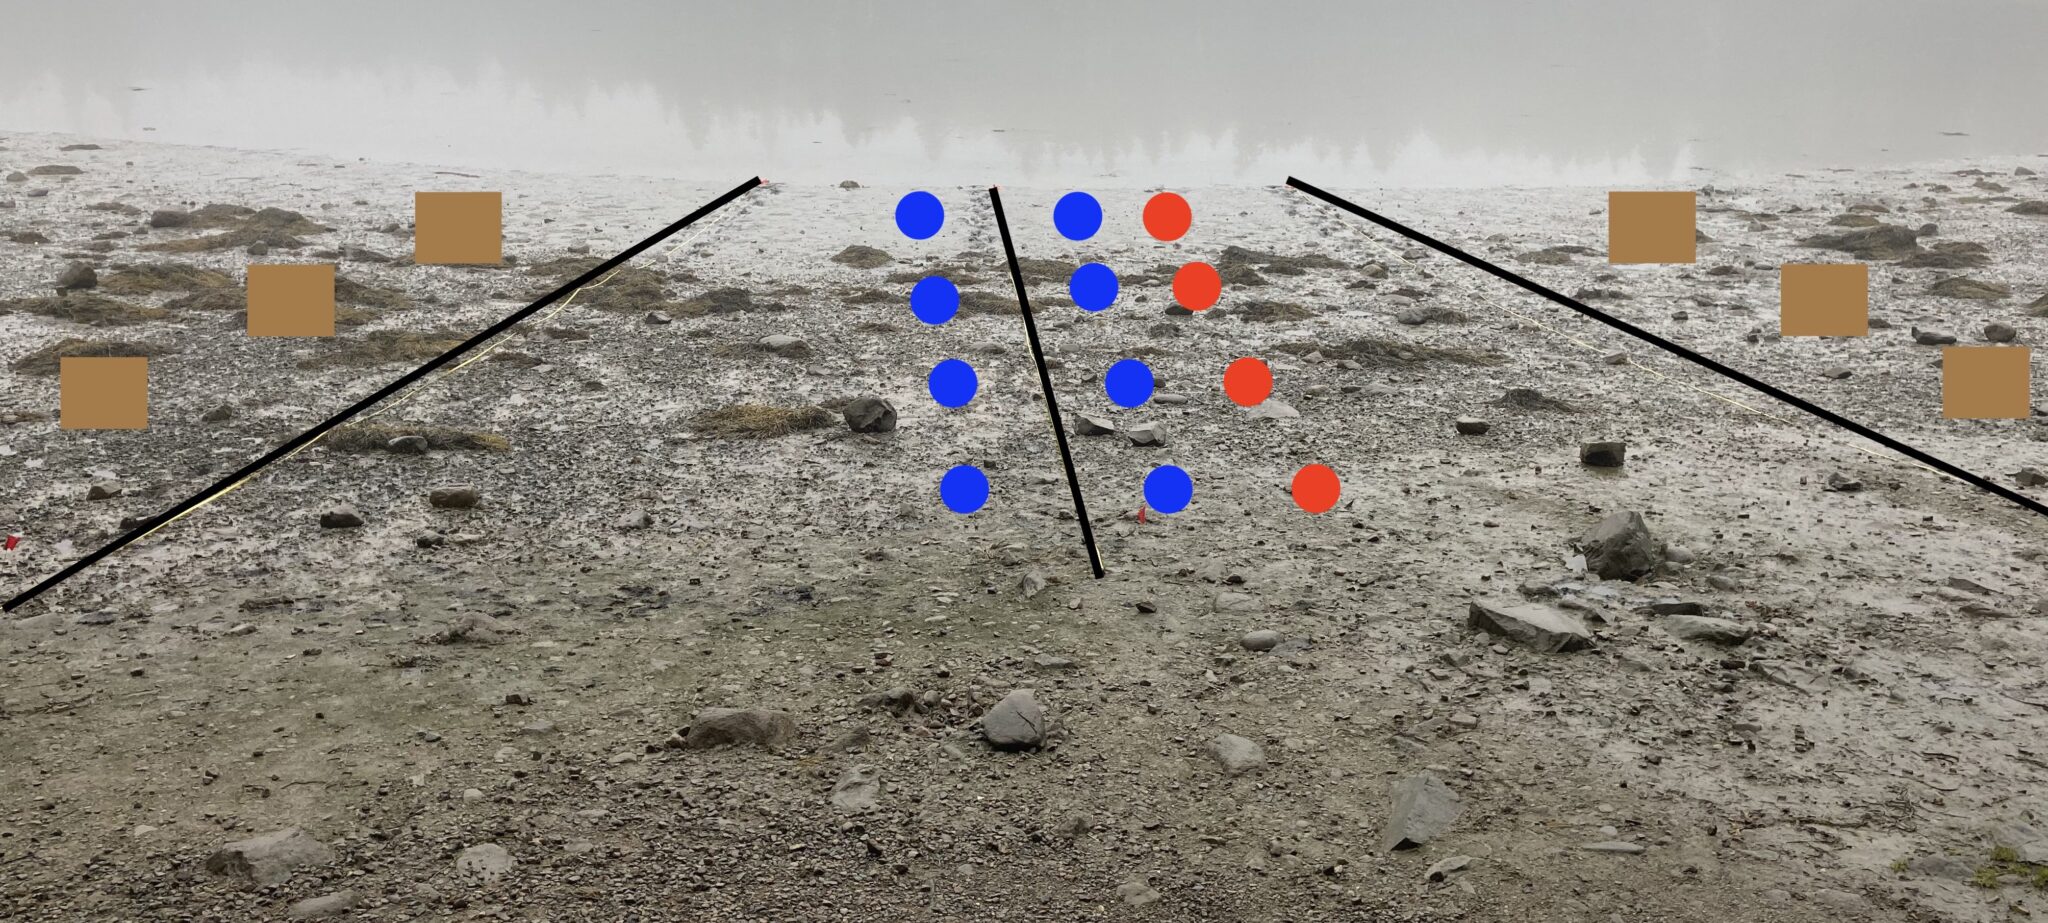 Photo of mudflat marked with, from left to right, three squares, transect line, four blue circles, transect line, four blue circles, four red circles, transect line, three squares.